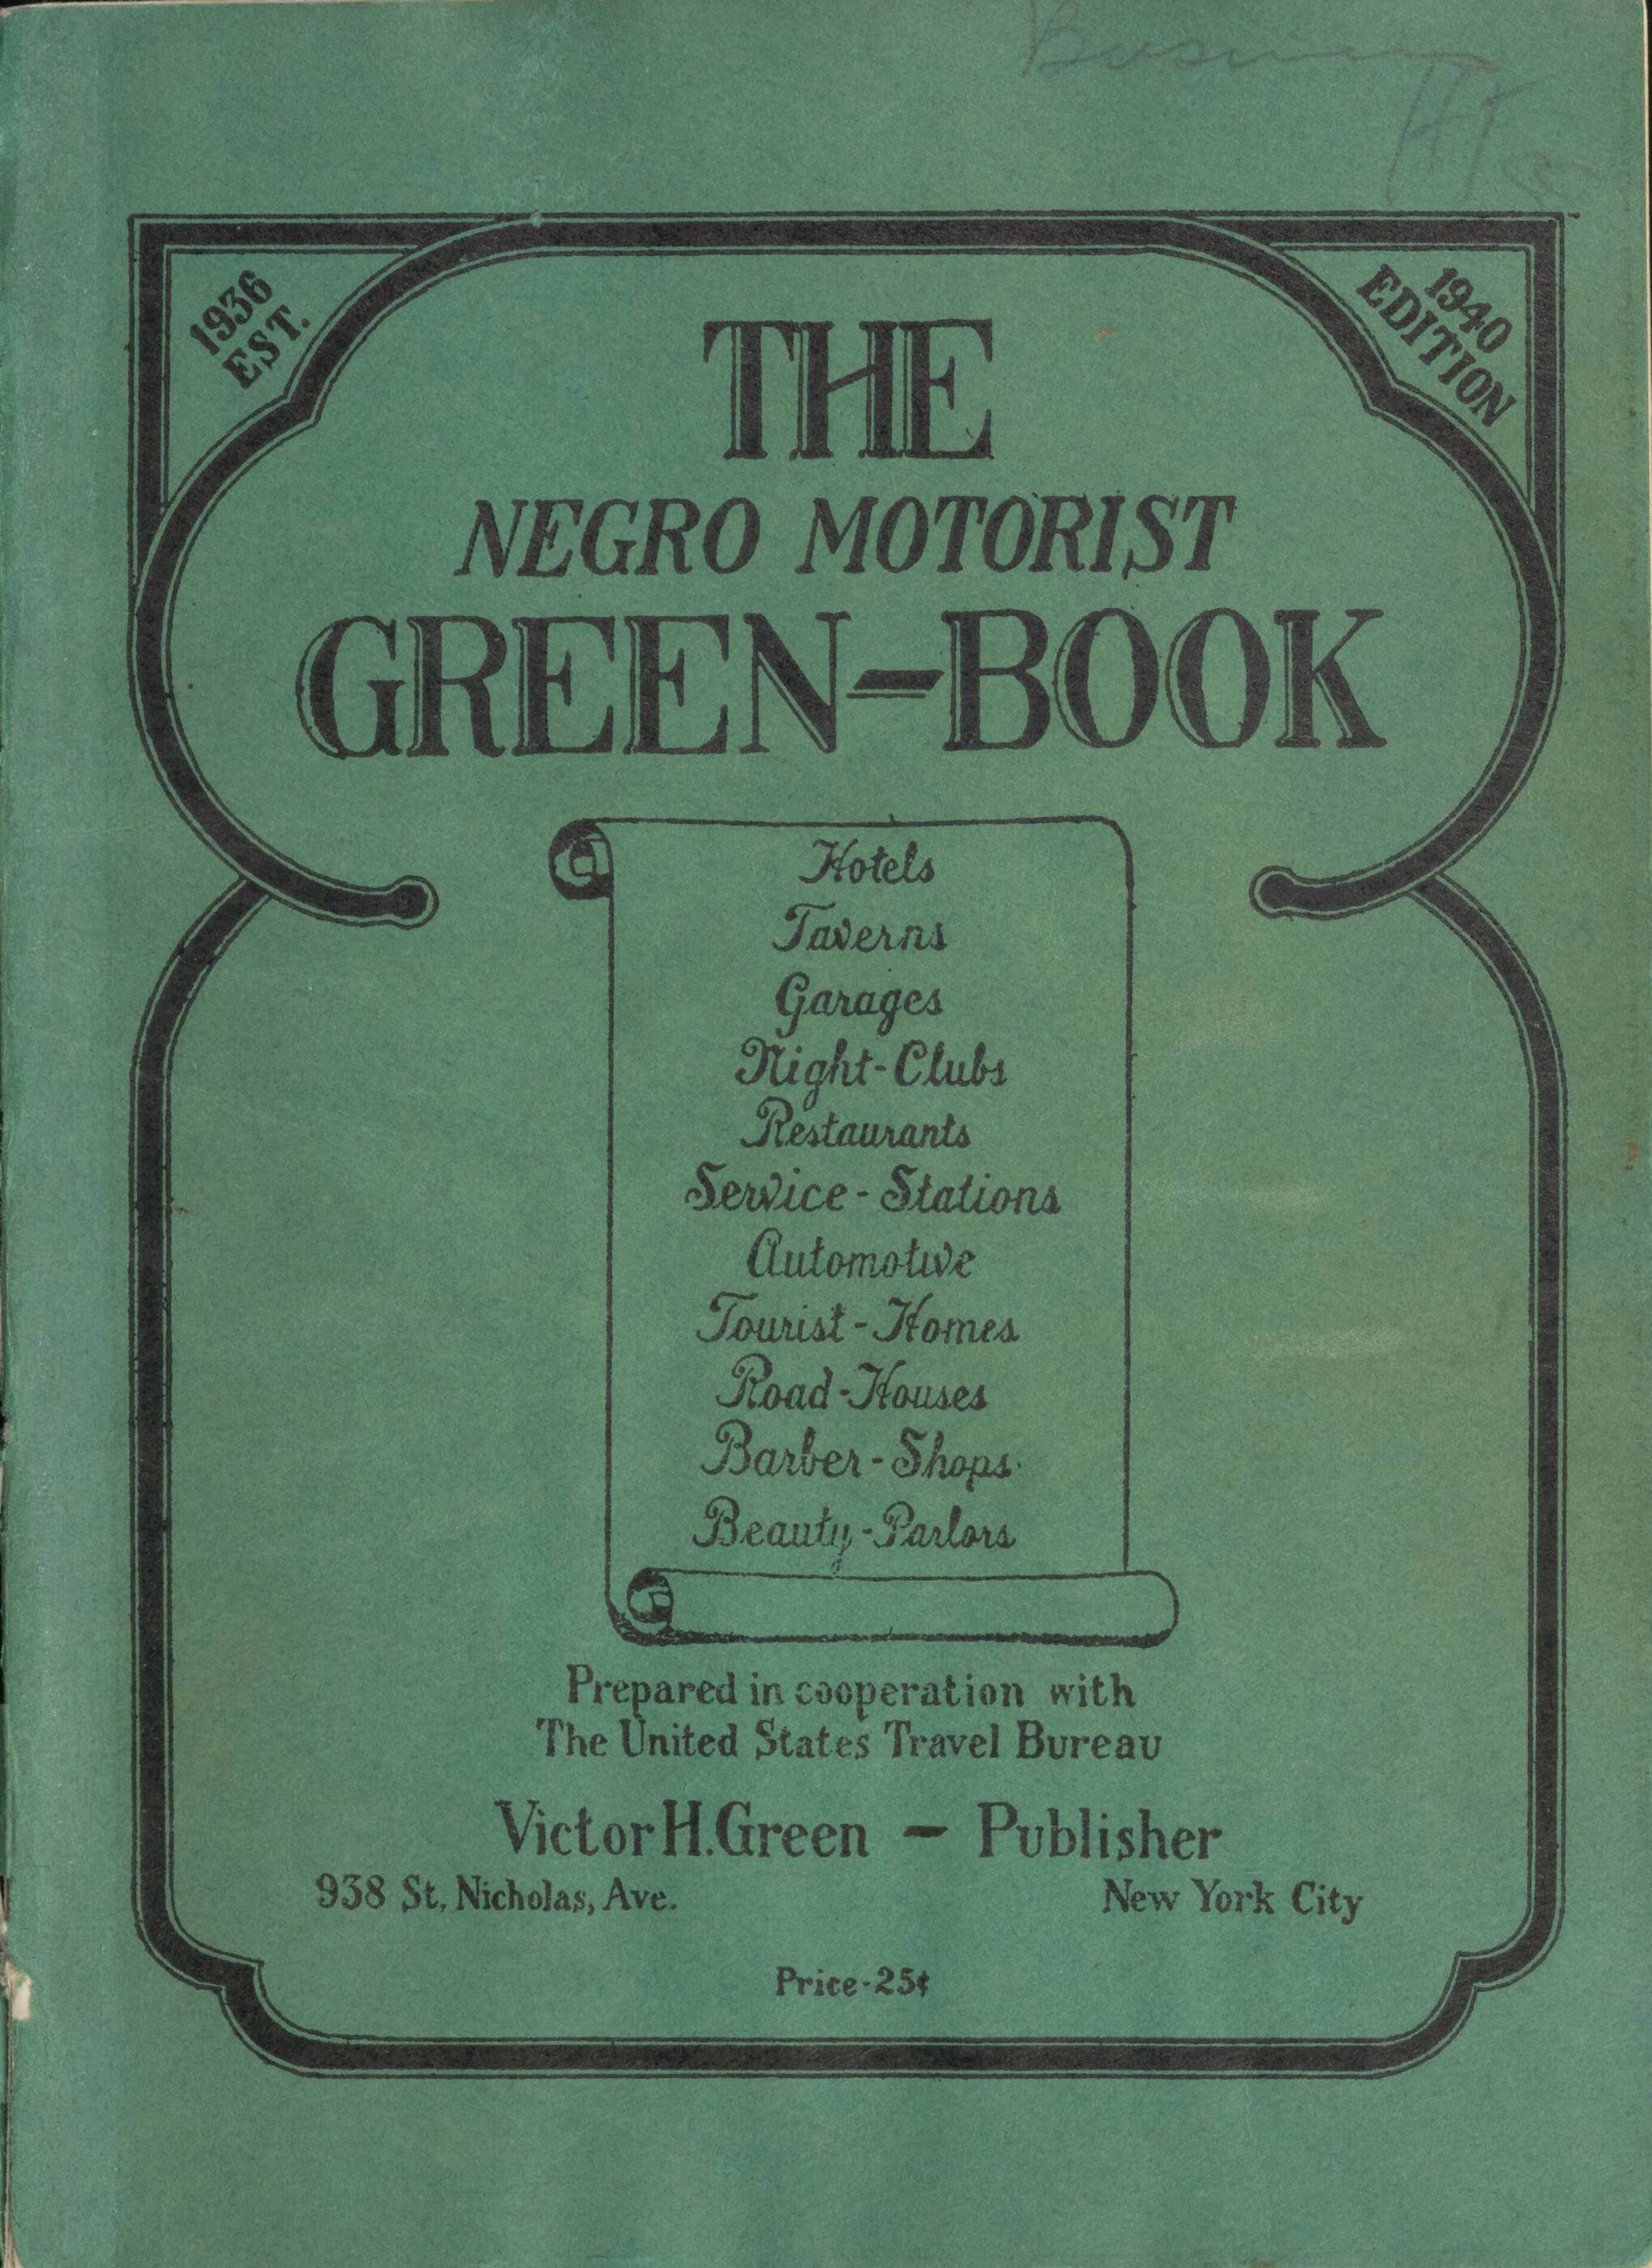 Cover of <em>The Negro Motorist Green-Book</em> (1940 edition). Schomburg Center for Research in Black Culture, Manuscripts Archives, and Rare Books Division, New York Public Library. 